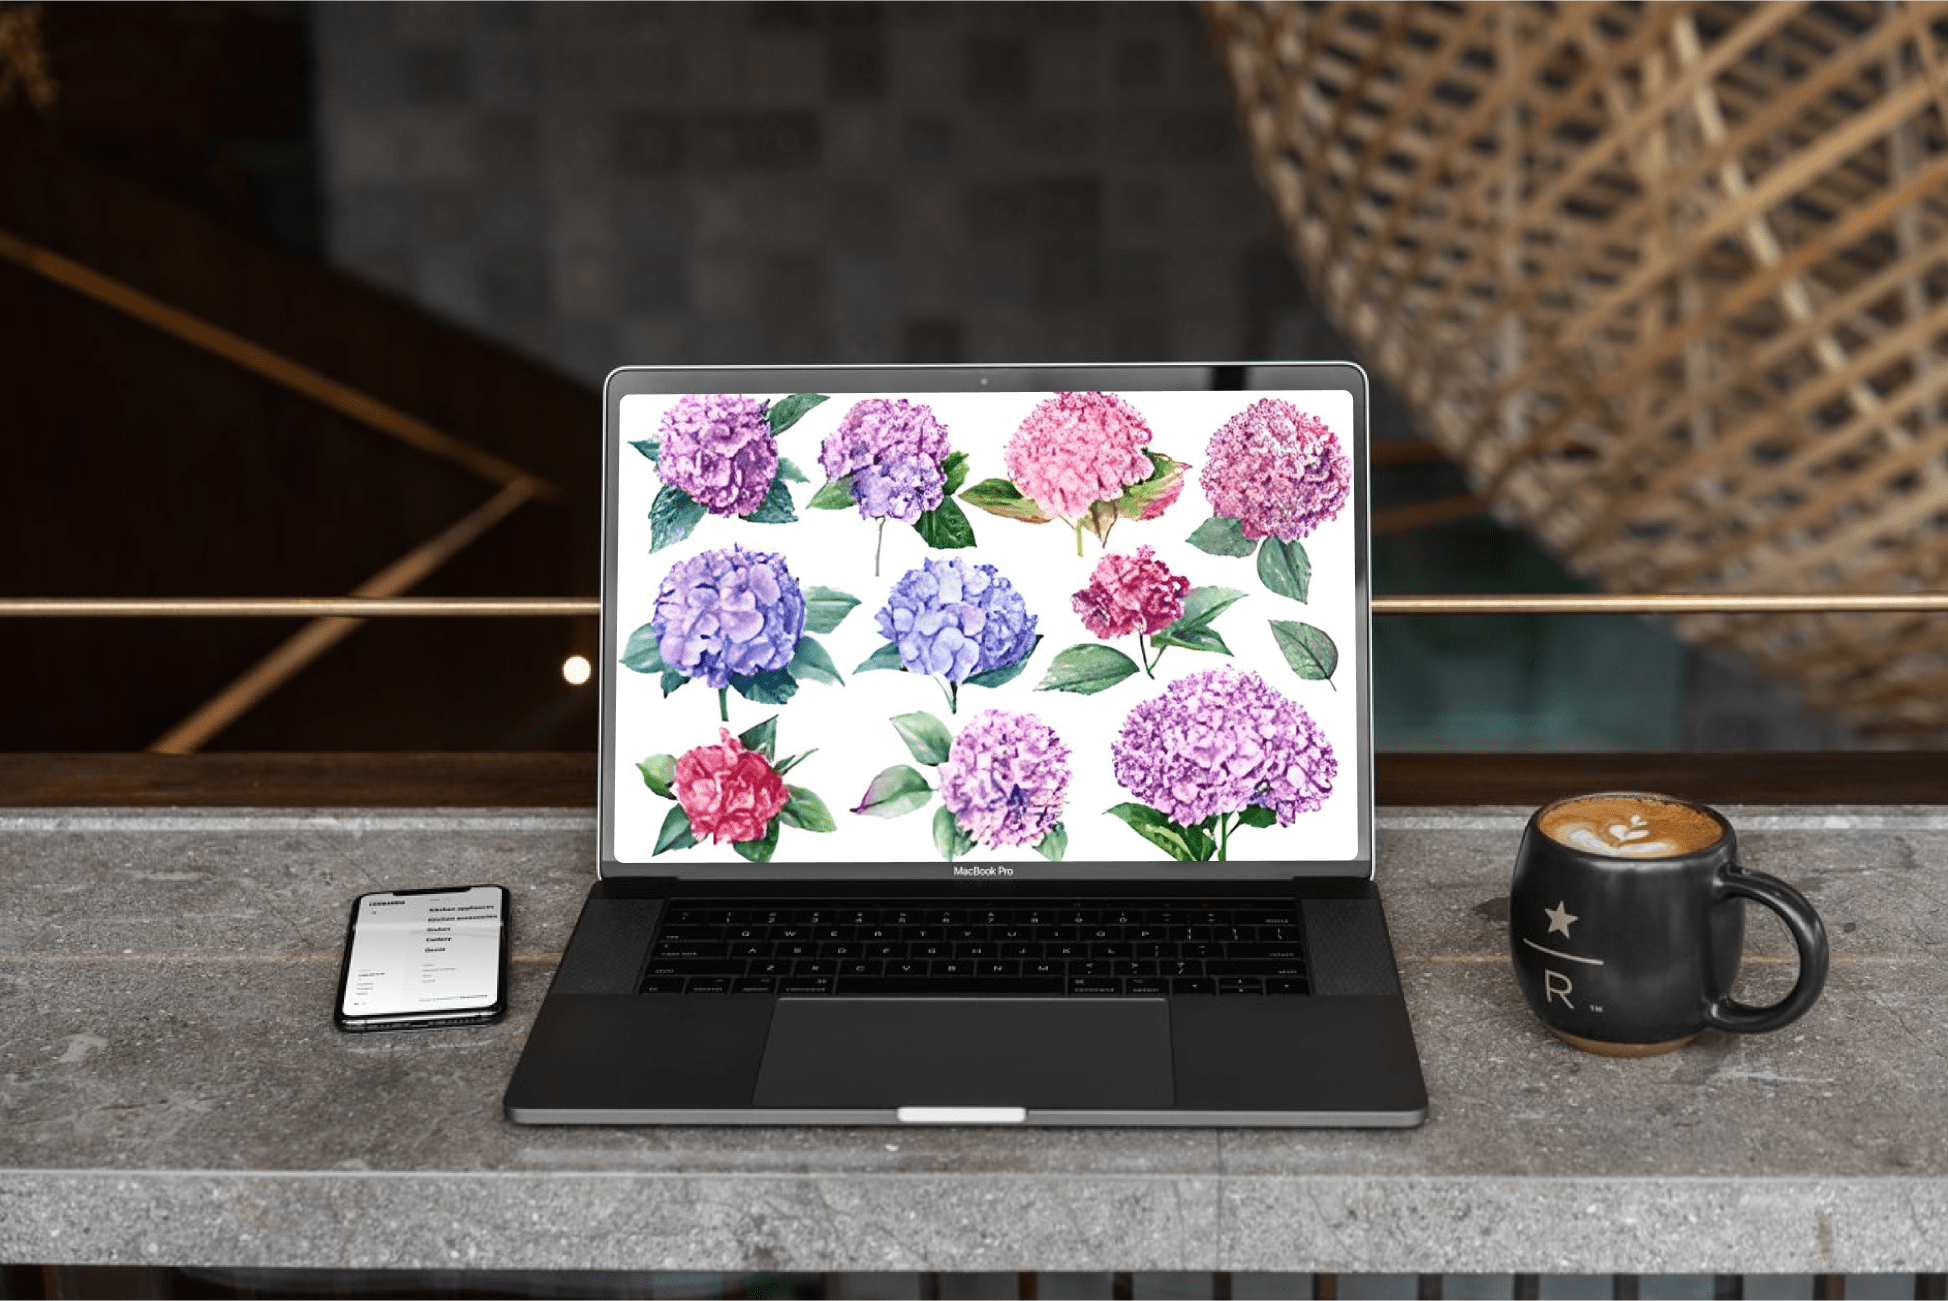 Delicate flowers - Beautiful Flowers On The Laptop.